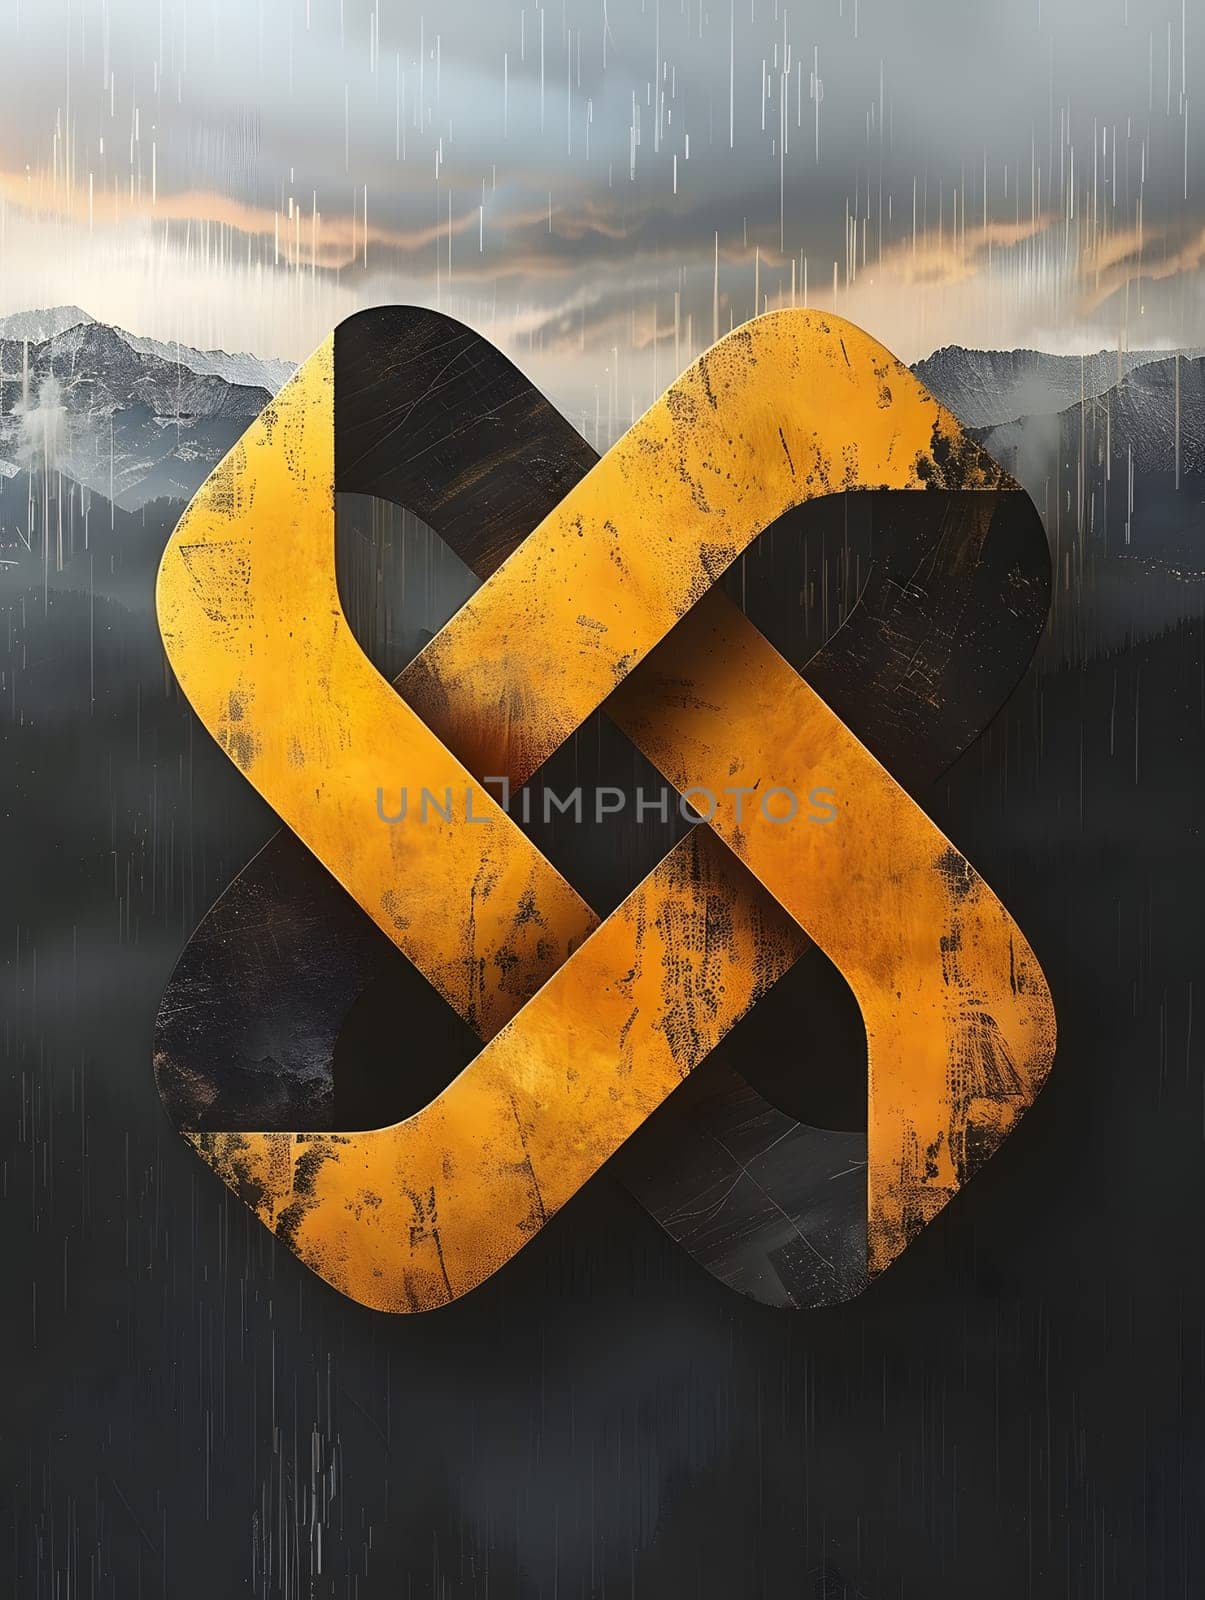 A yellow and black symbol featuring mountains in a natural landscape by Nadtochiy